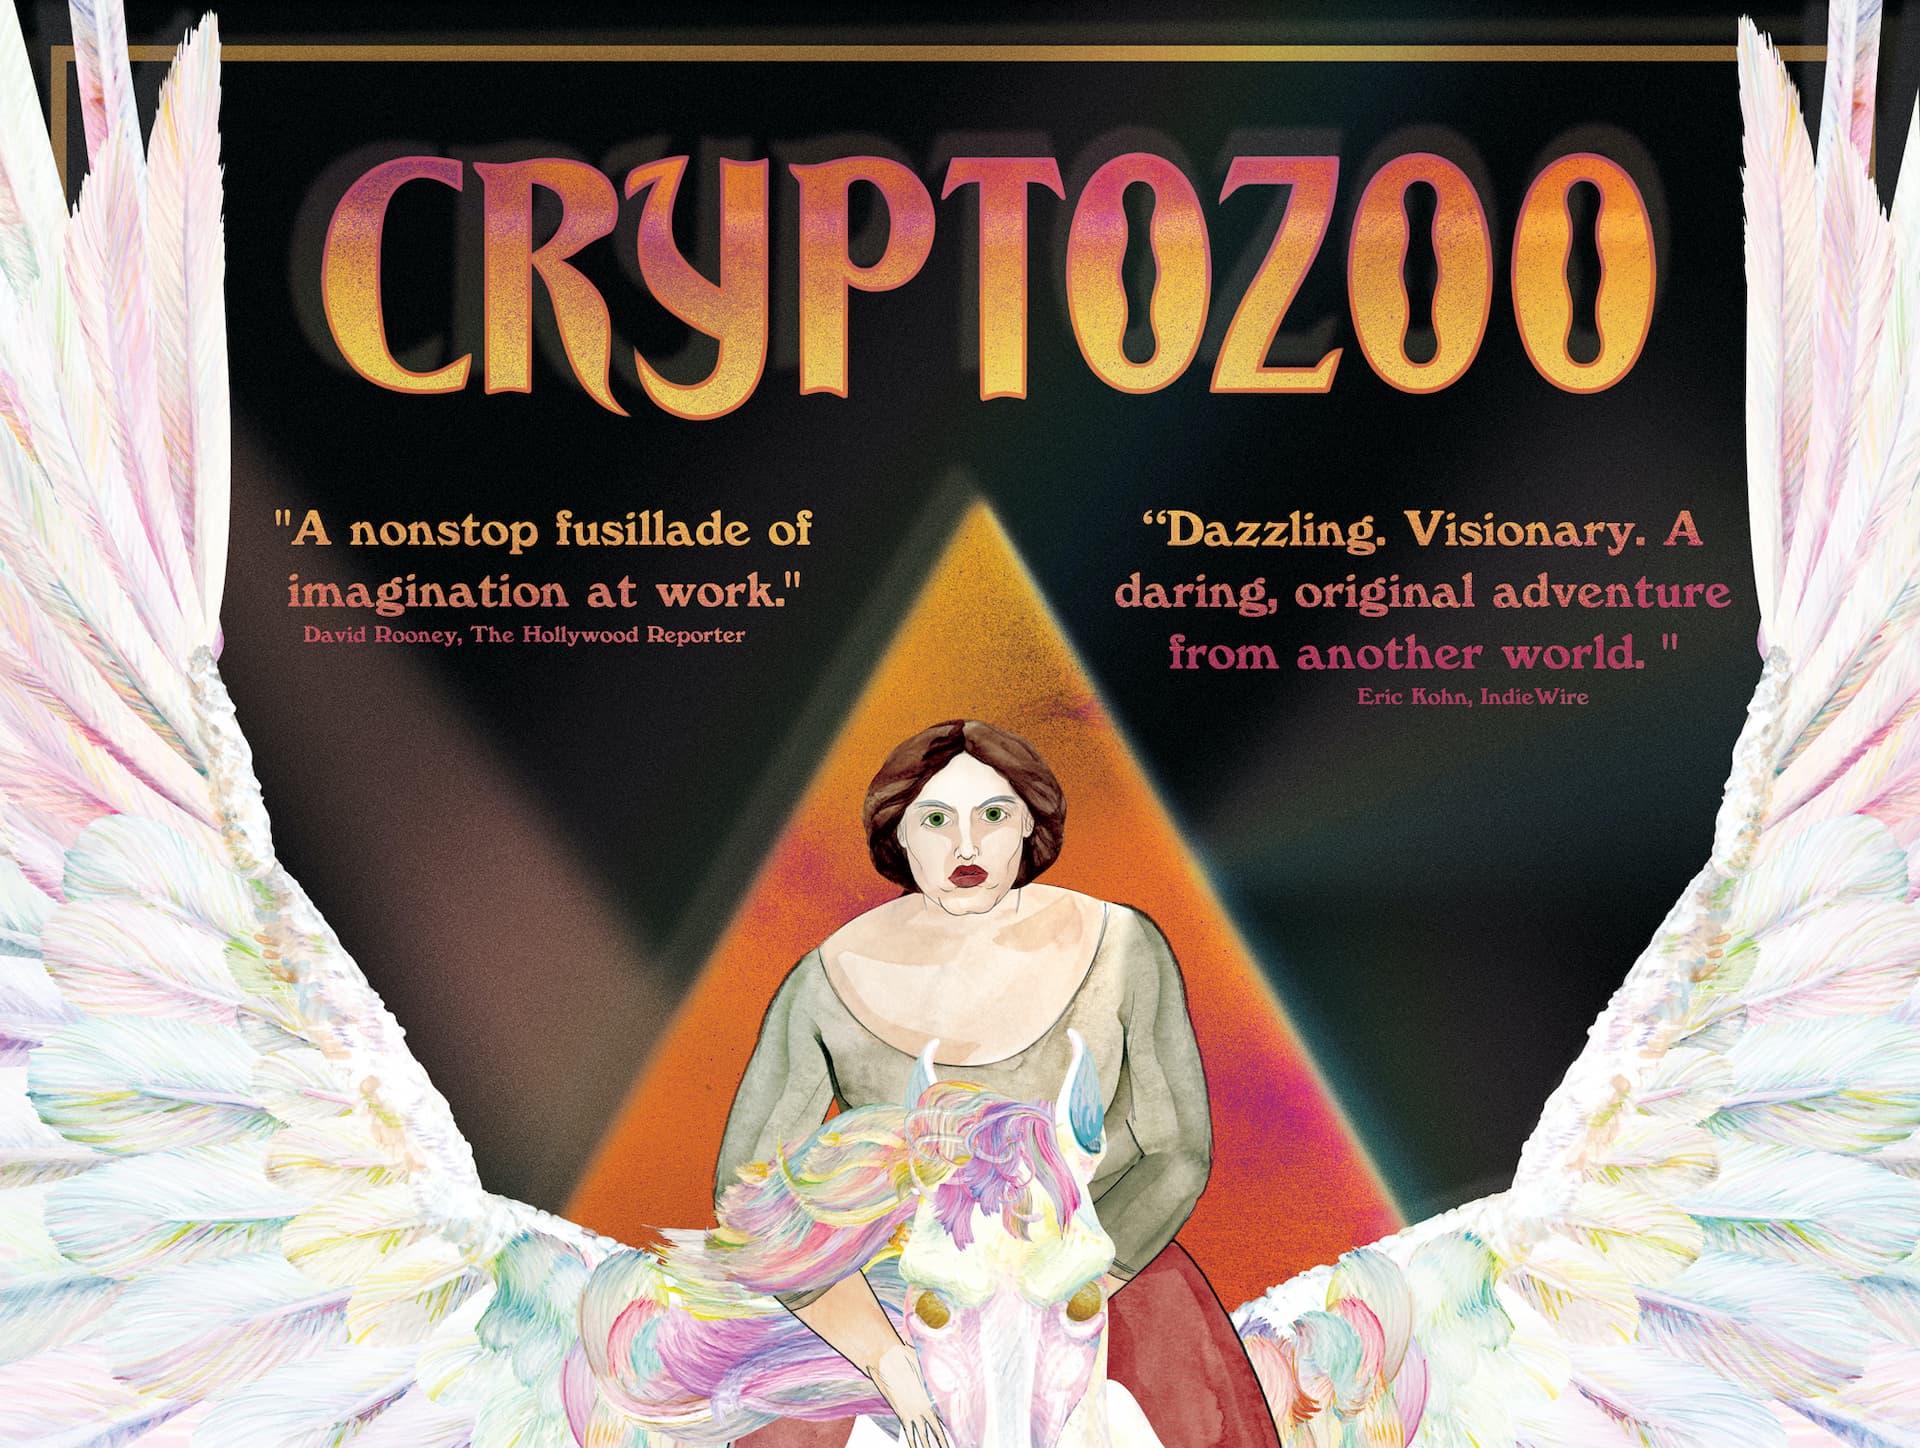 “Cryptozoo” Opens in Theaters and on TVOD